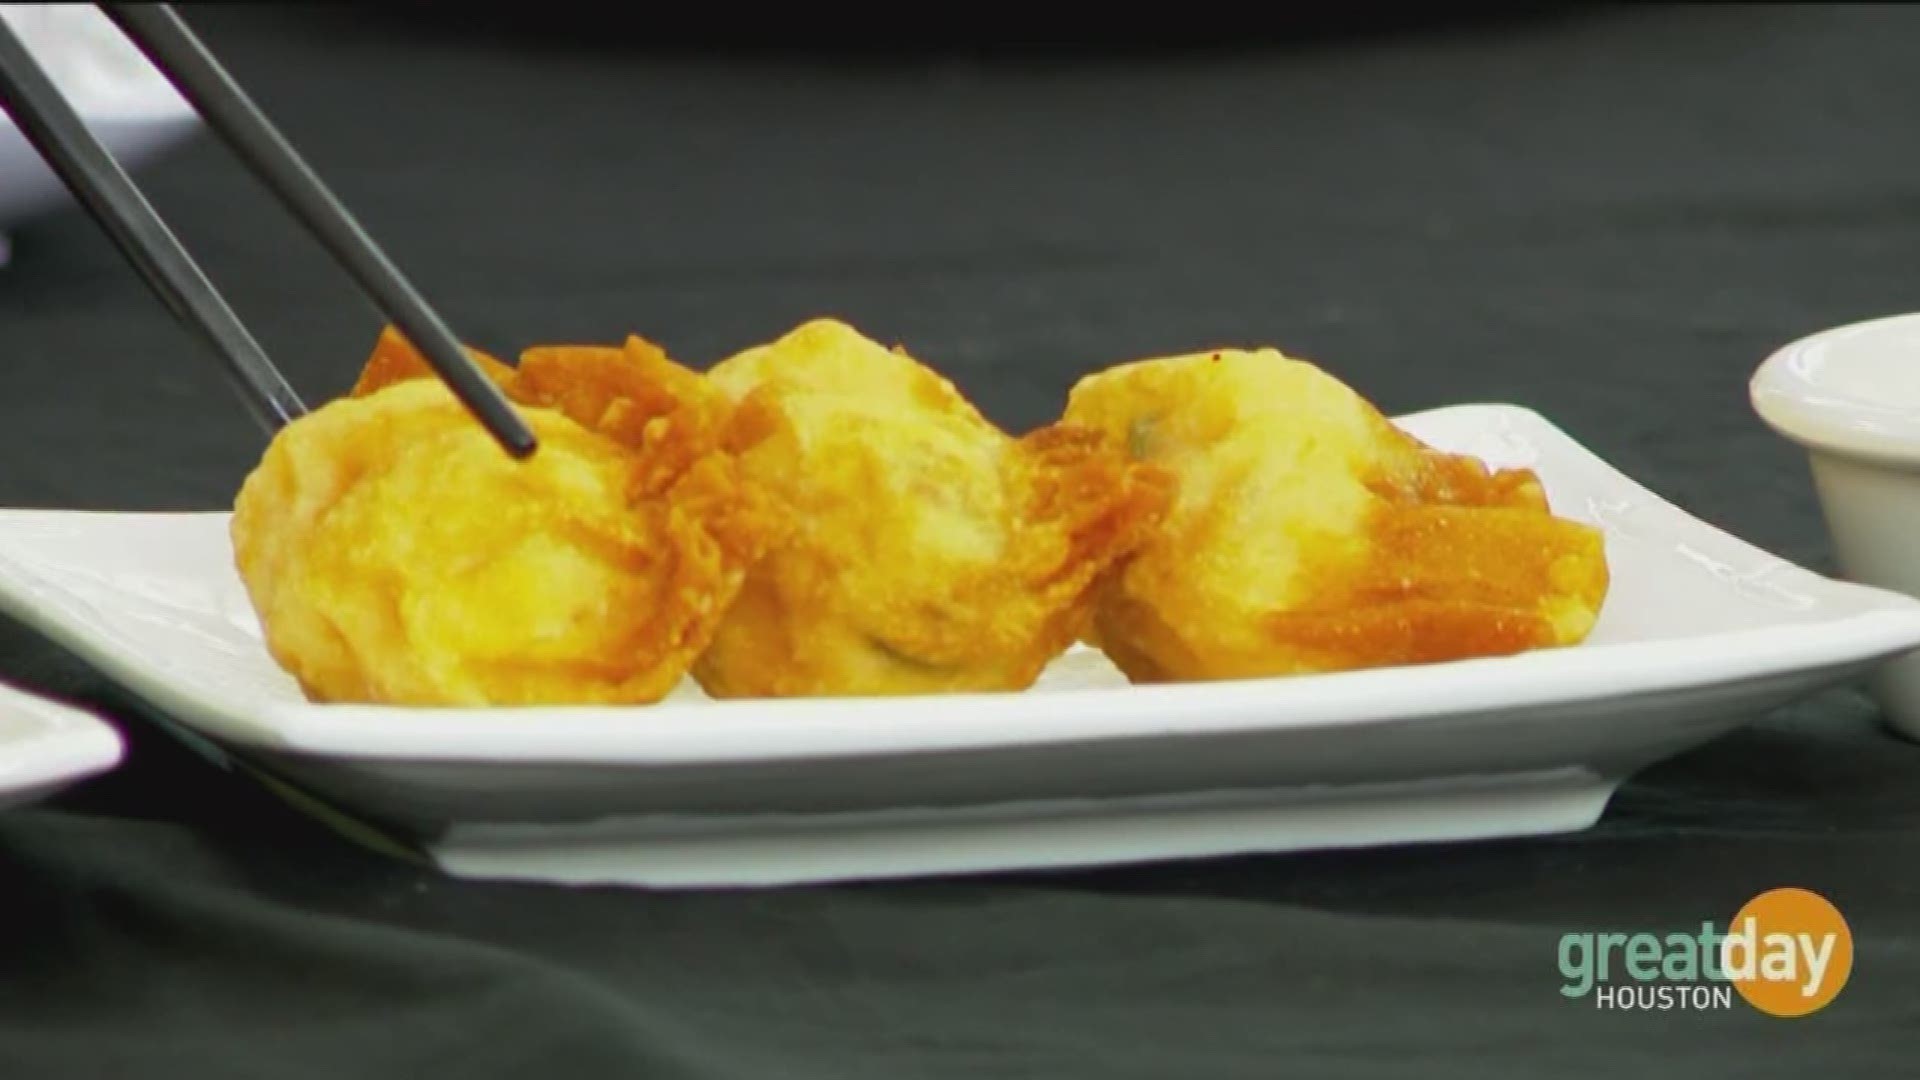 Andy Nguyen with Ocean Palace restaurant takes us through a taste-tour of their dumplings